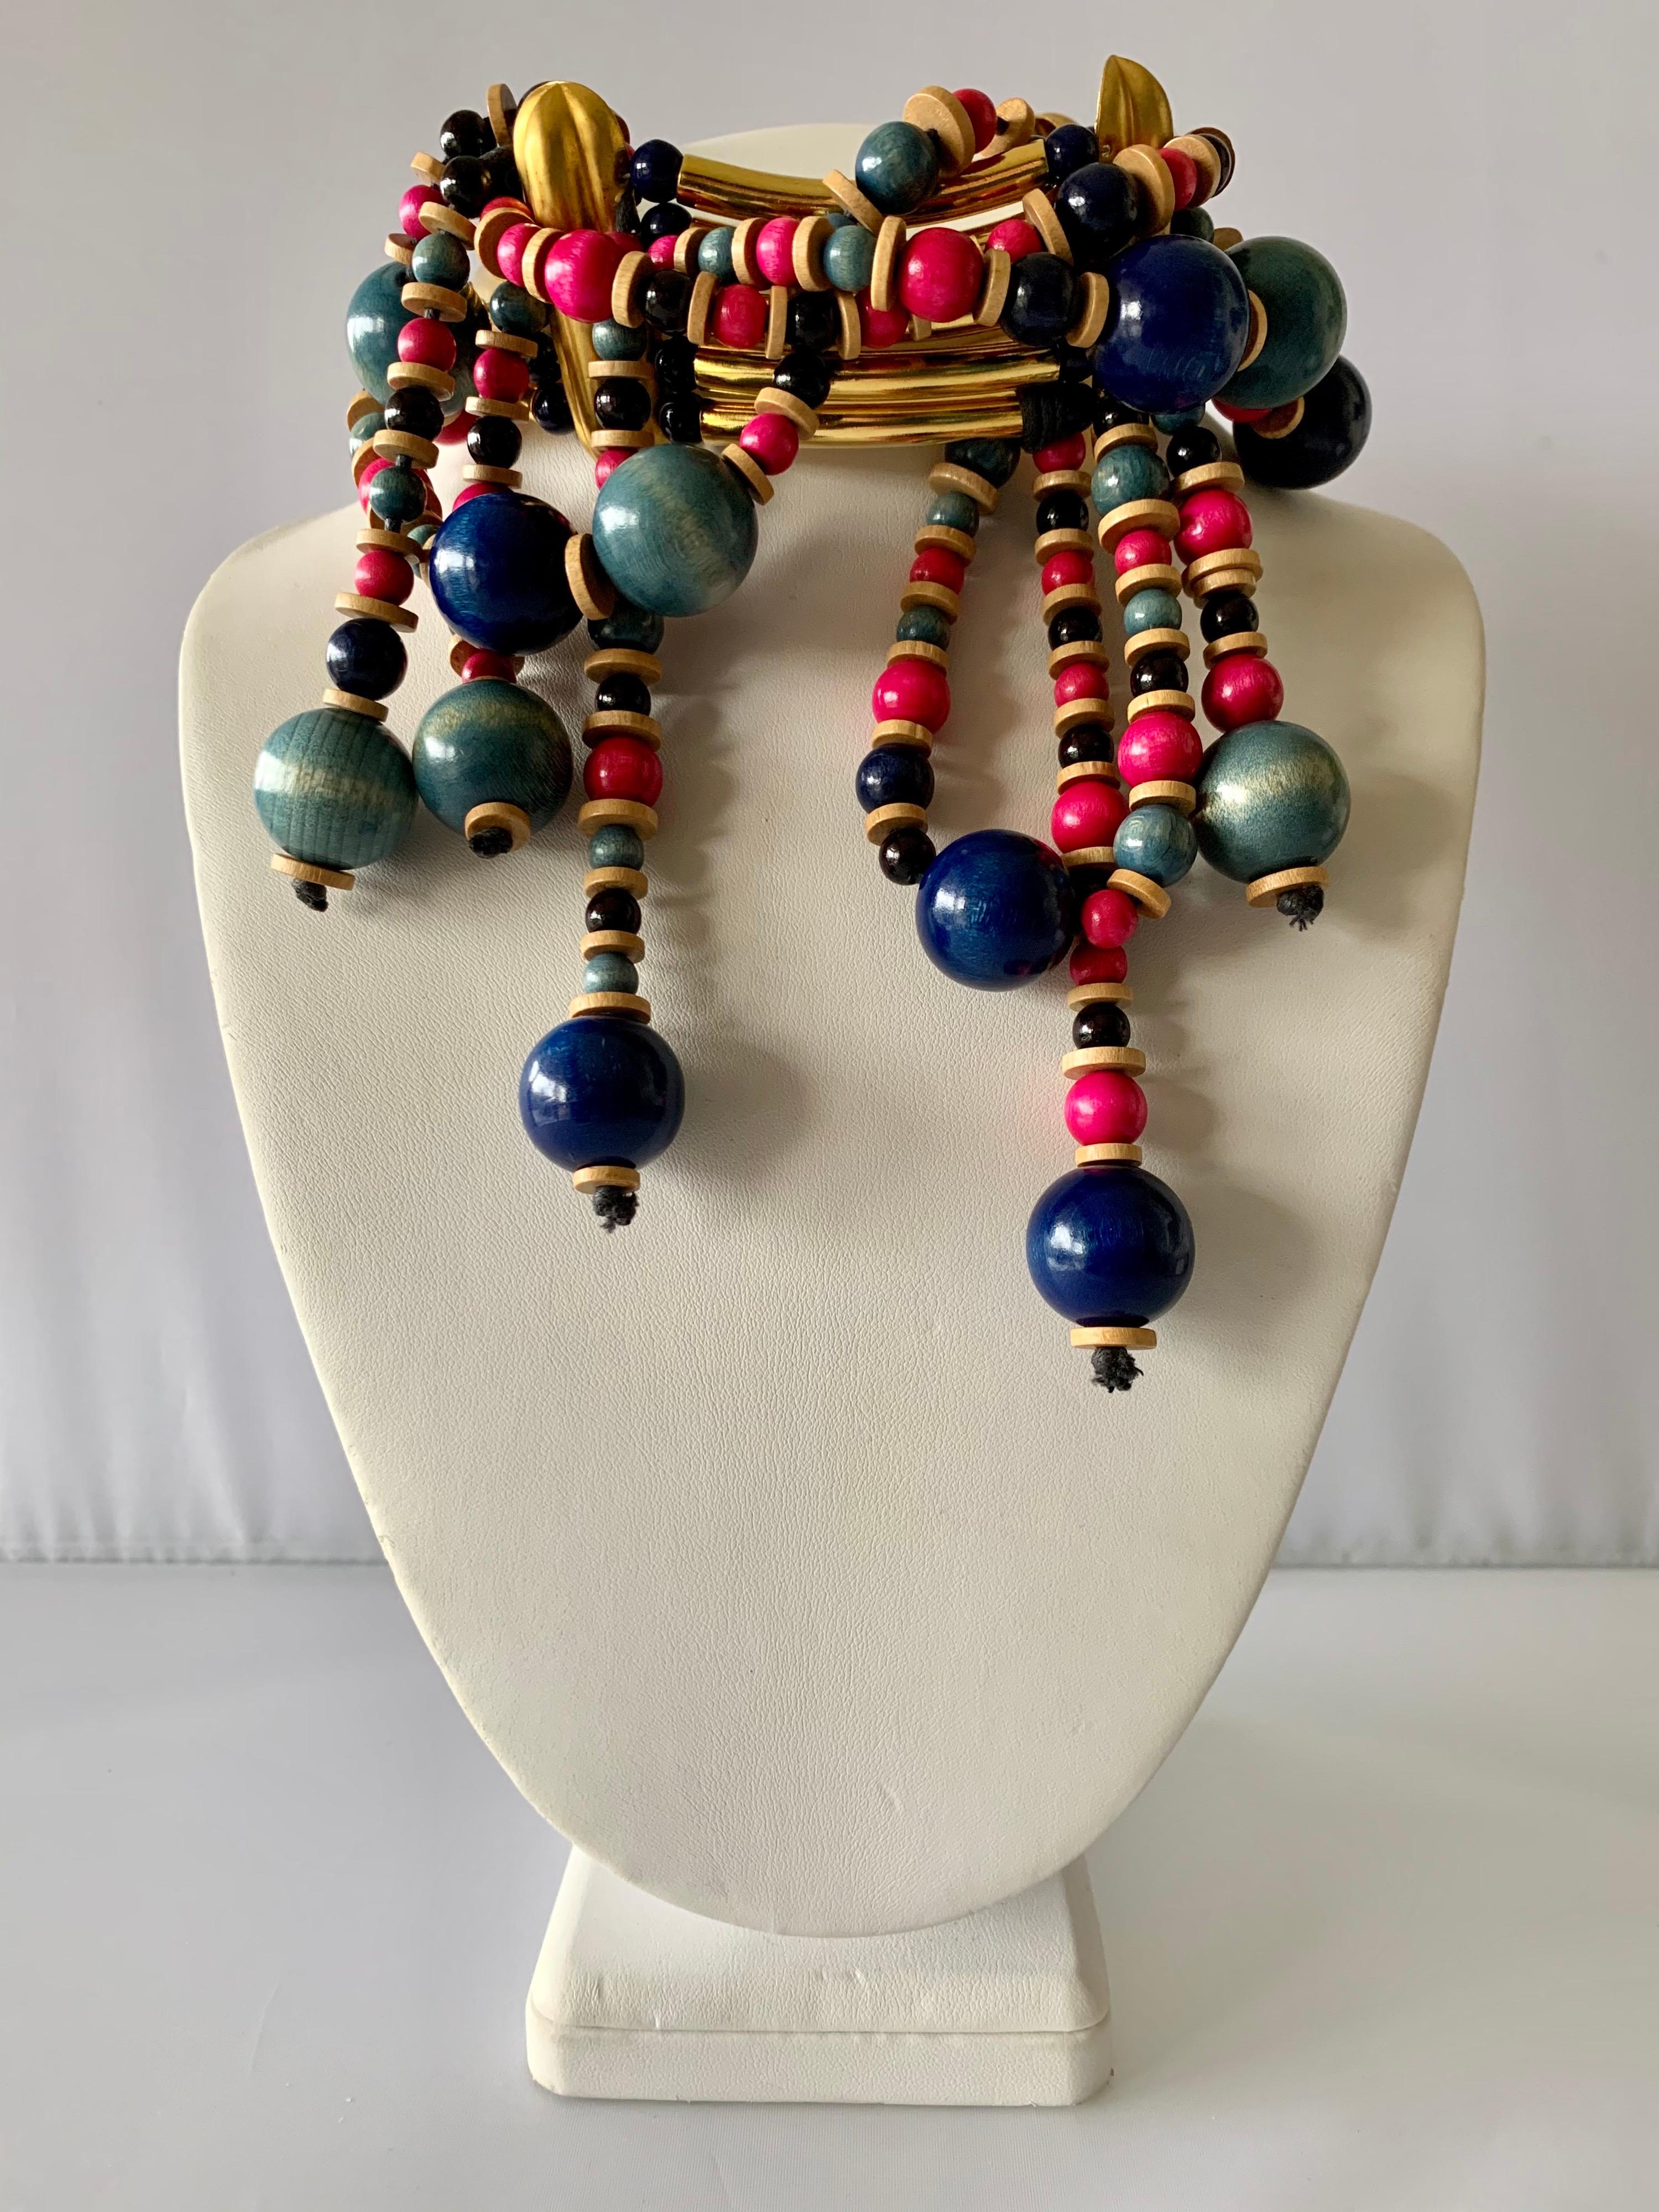 Exquisite and rare find! Vintage Yves Saint Laurent Haute Couture tribal statement necklace/choker, comprised out of long architectural gilt metal tube beads and round wooden beads in; blue, pink, and turquoise. The beads wrap around the entire